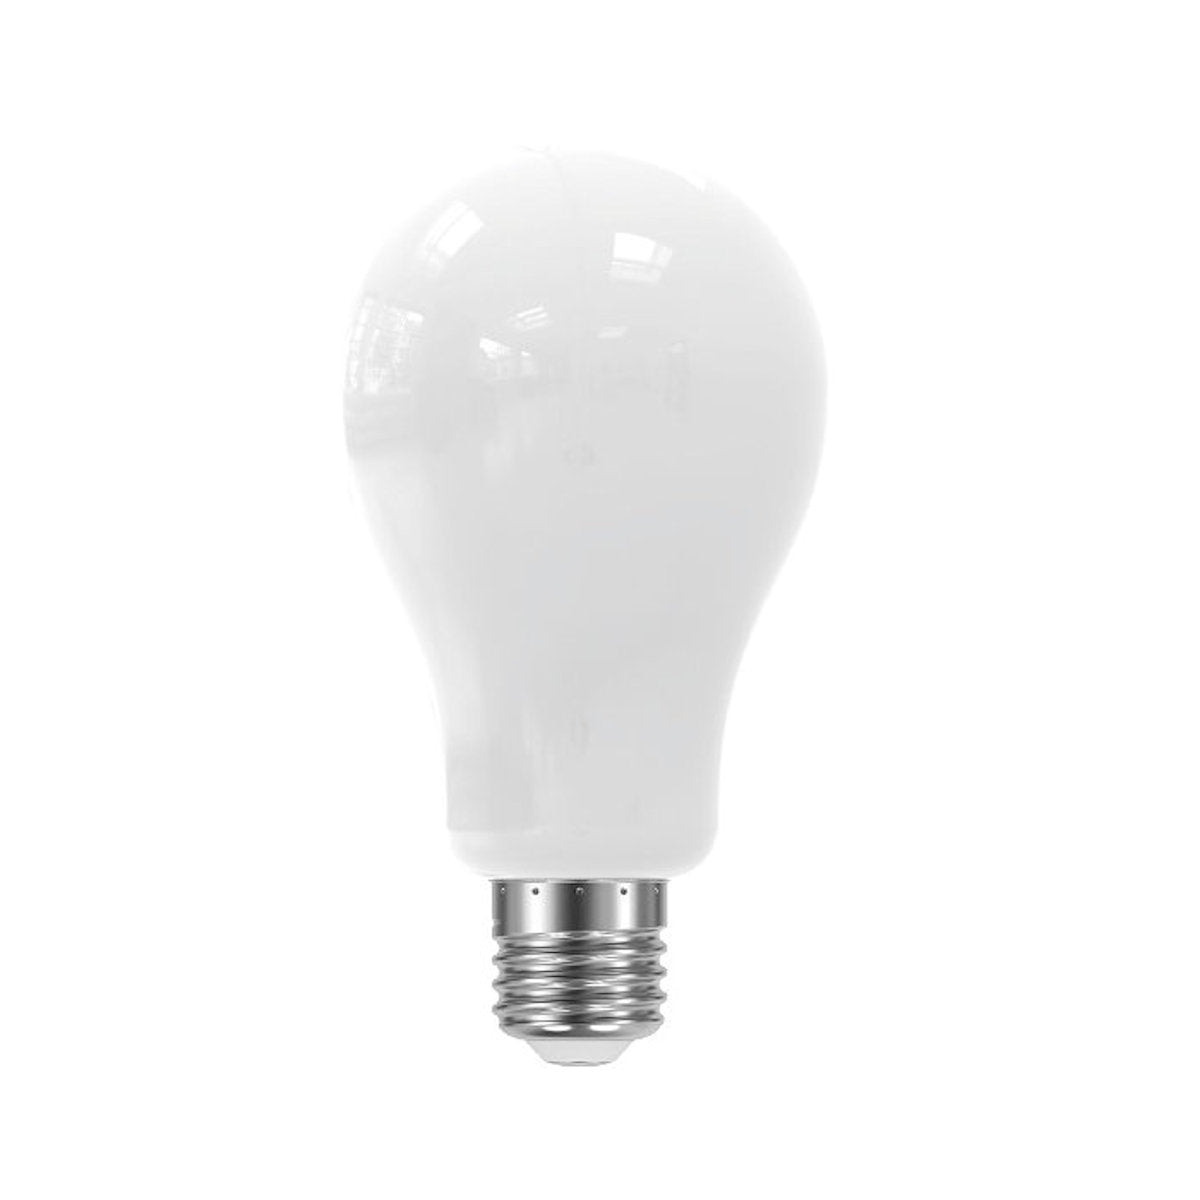 A60 8W E27 Dimmable LED Lamp